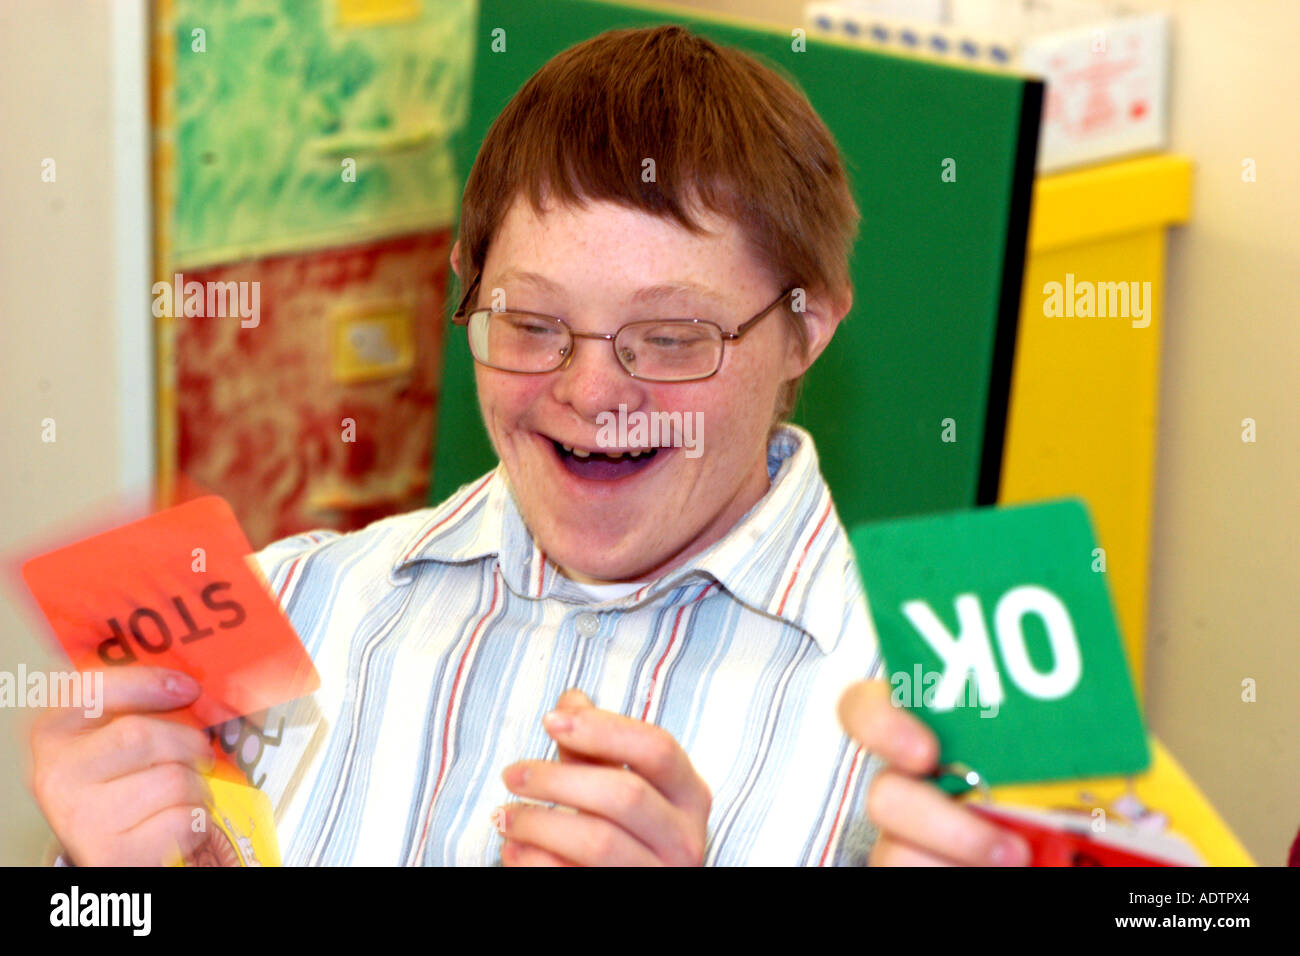 A young Downs Syndrome man at a Learning Disabilities support group meeting uses cards to express himself in meetings to aid com Stock Photo